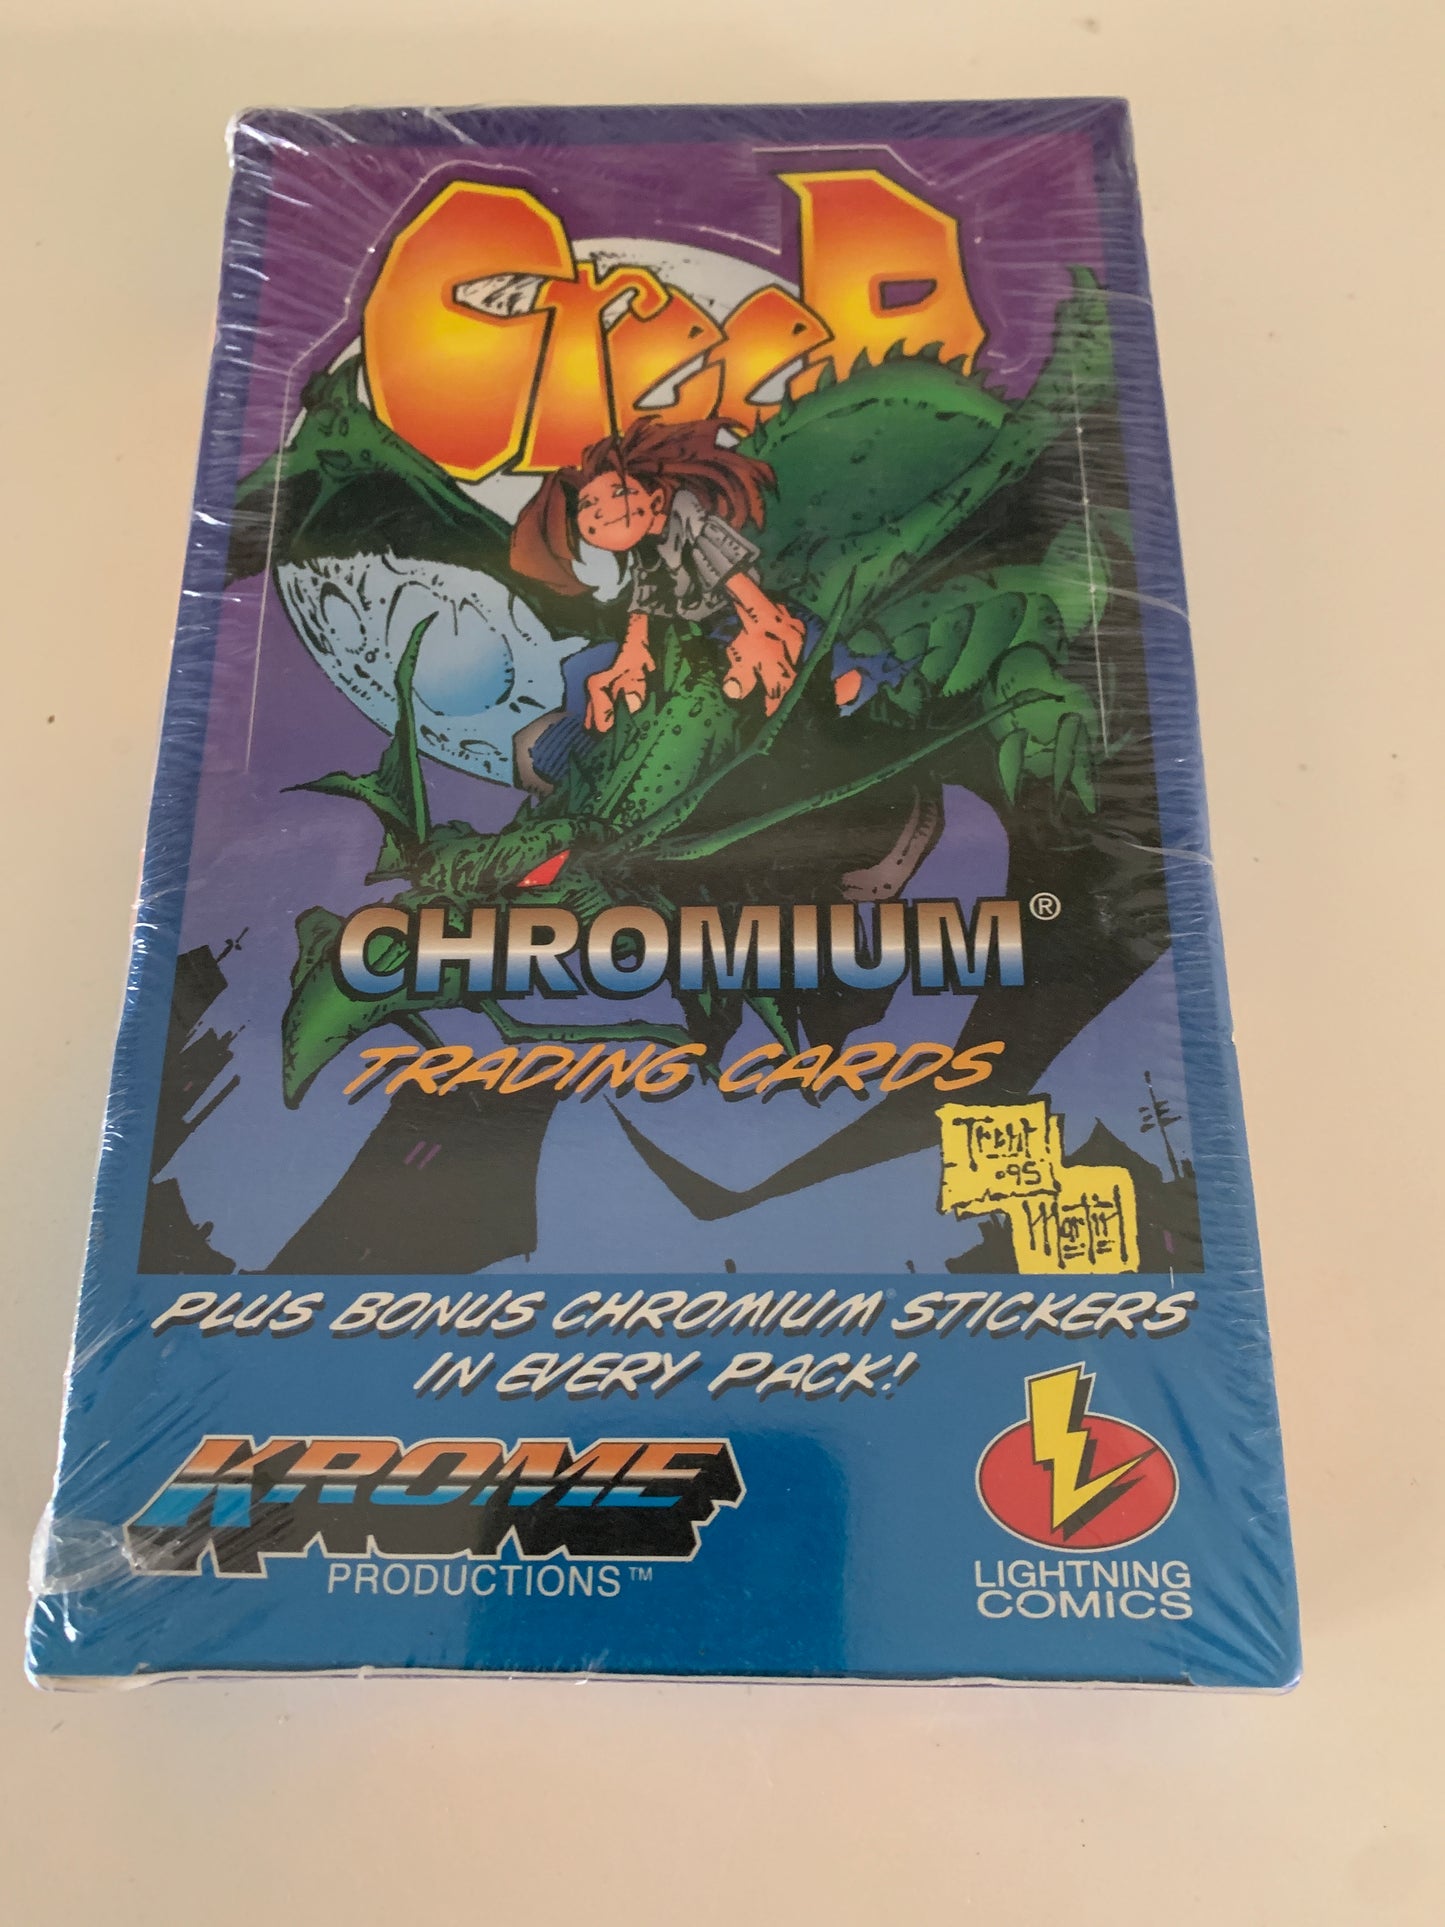 Creed Chromium Trading Card Box 1996 by Trent Kaniuga New Factory Sealed